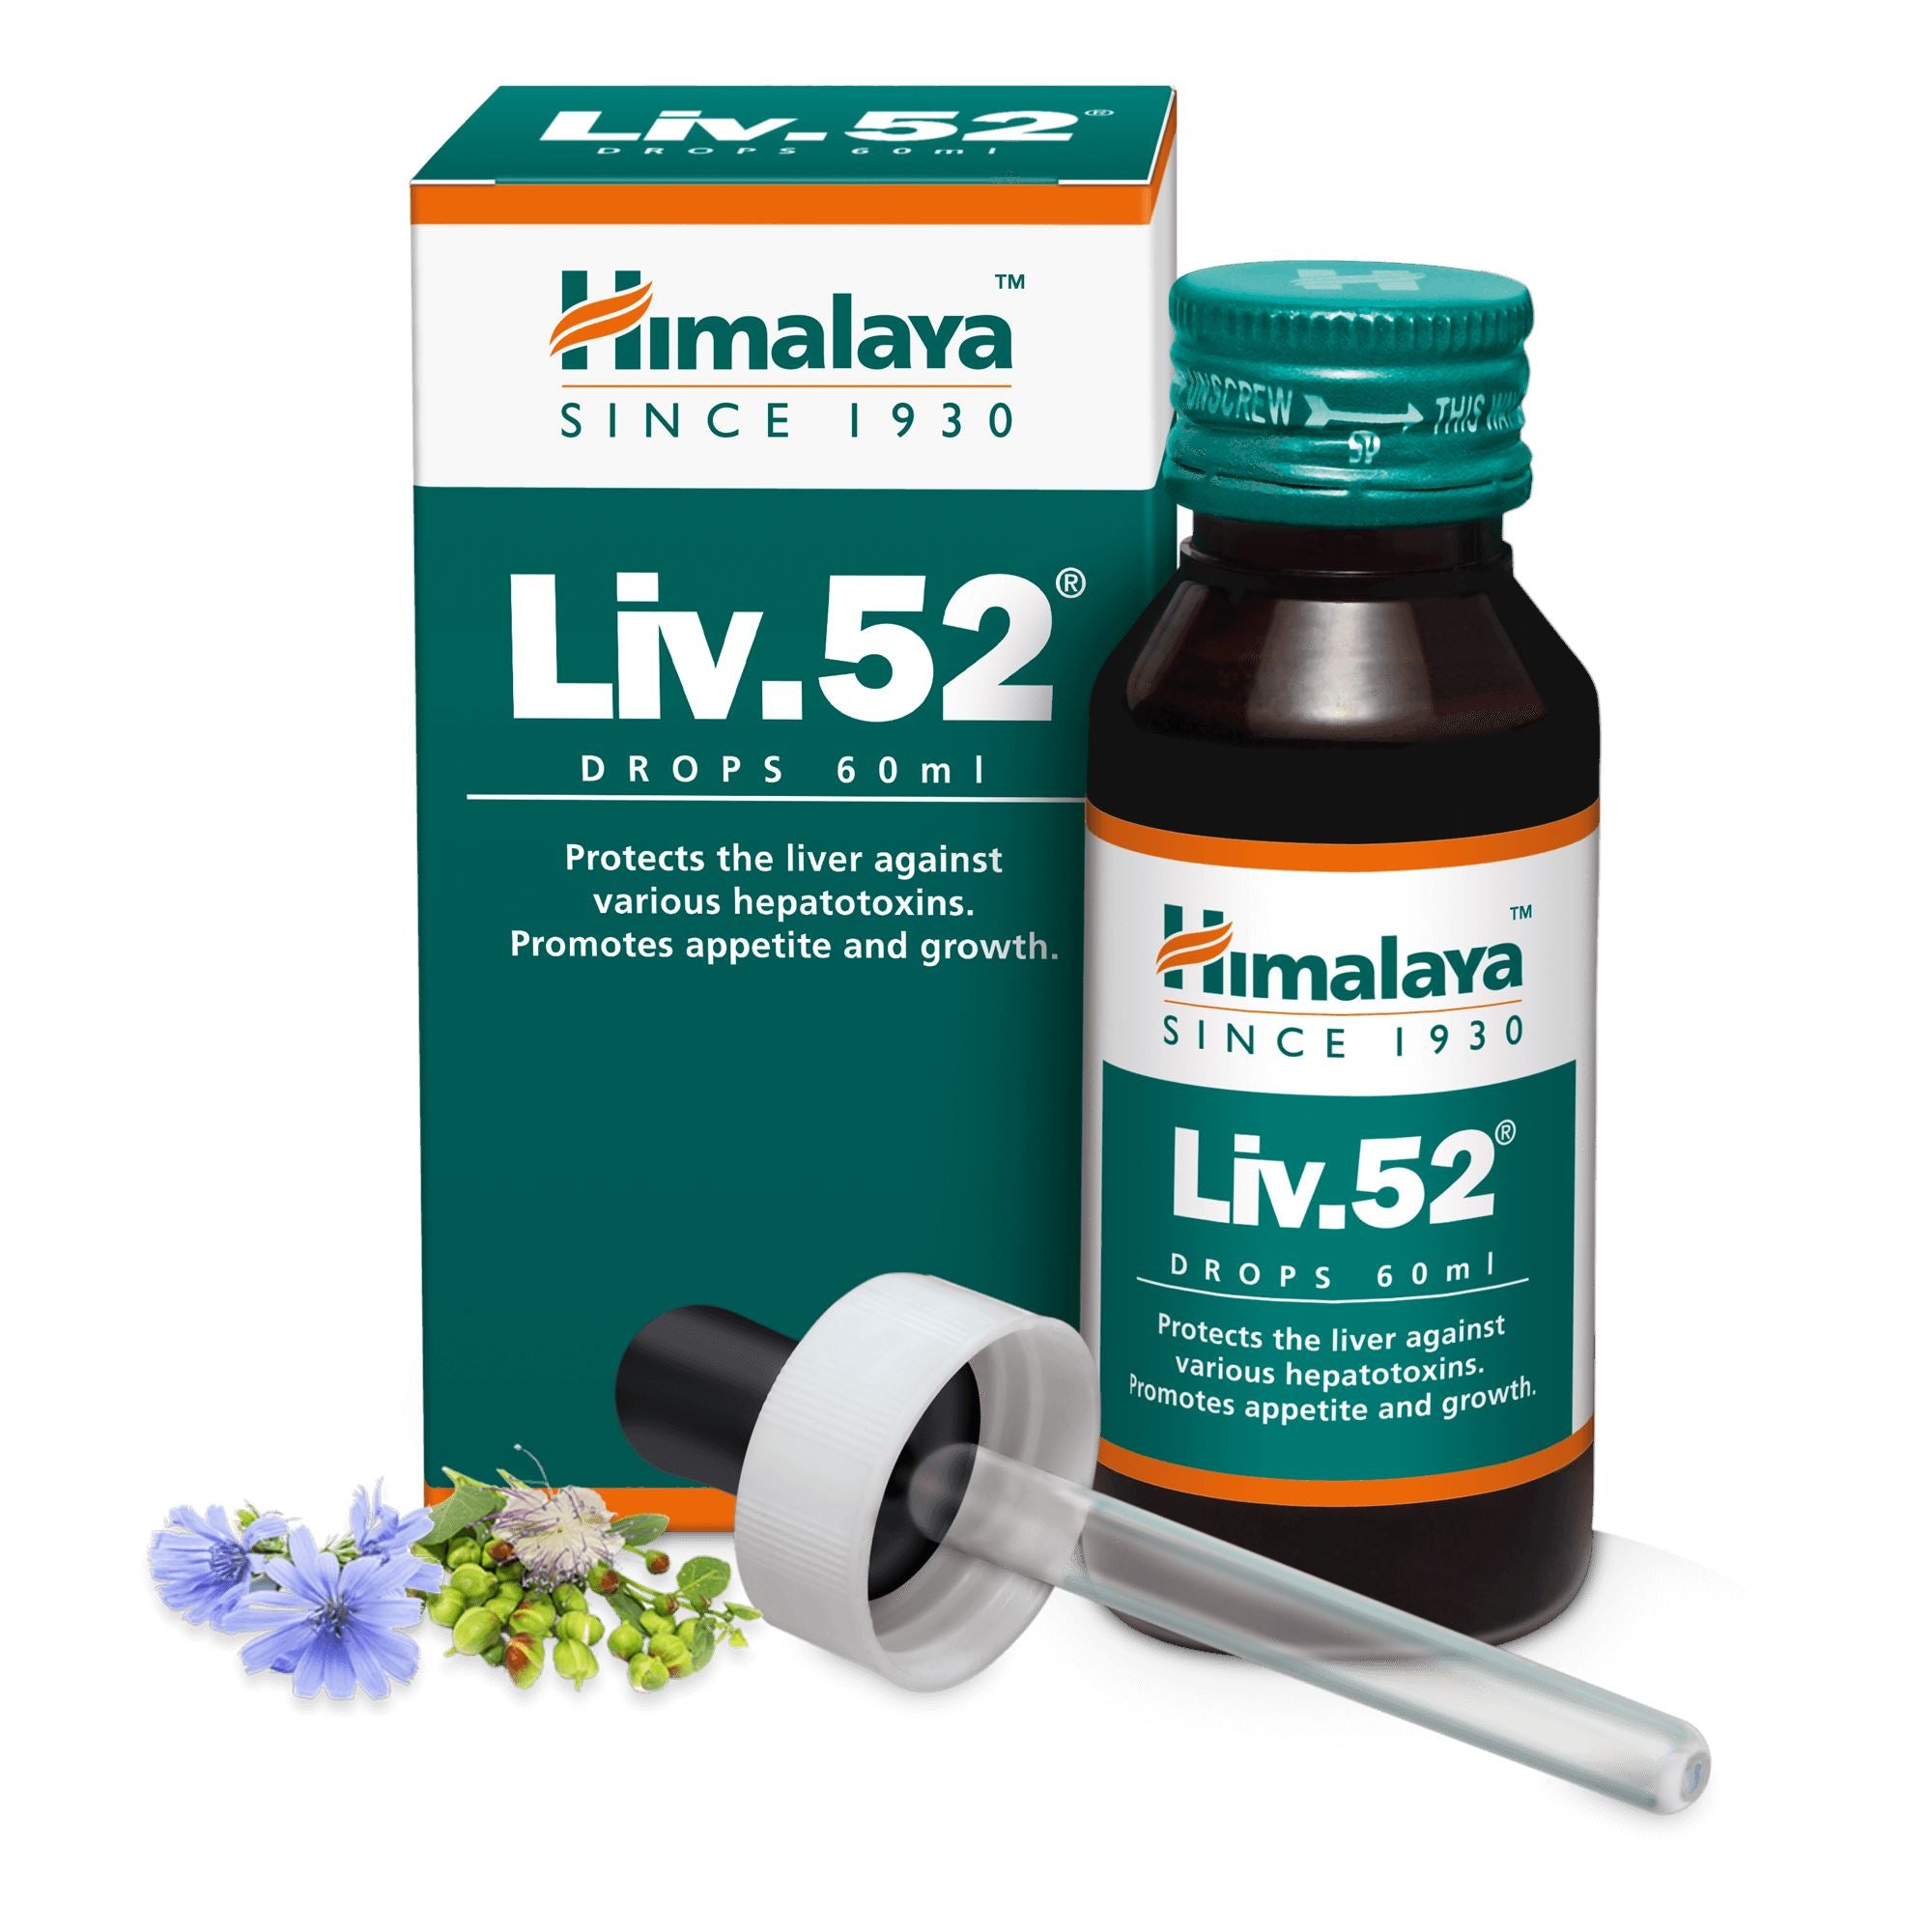 Himalaya Liv.52 Drops -  Manages liver health and improves appetite and digestion